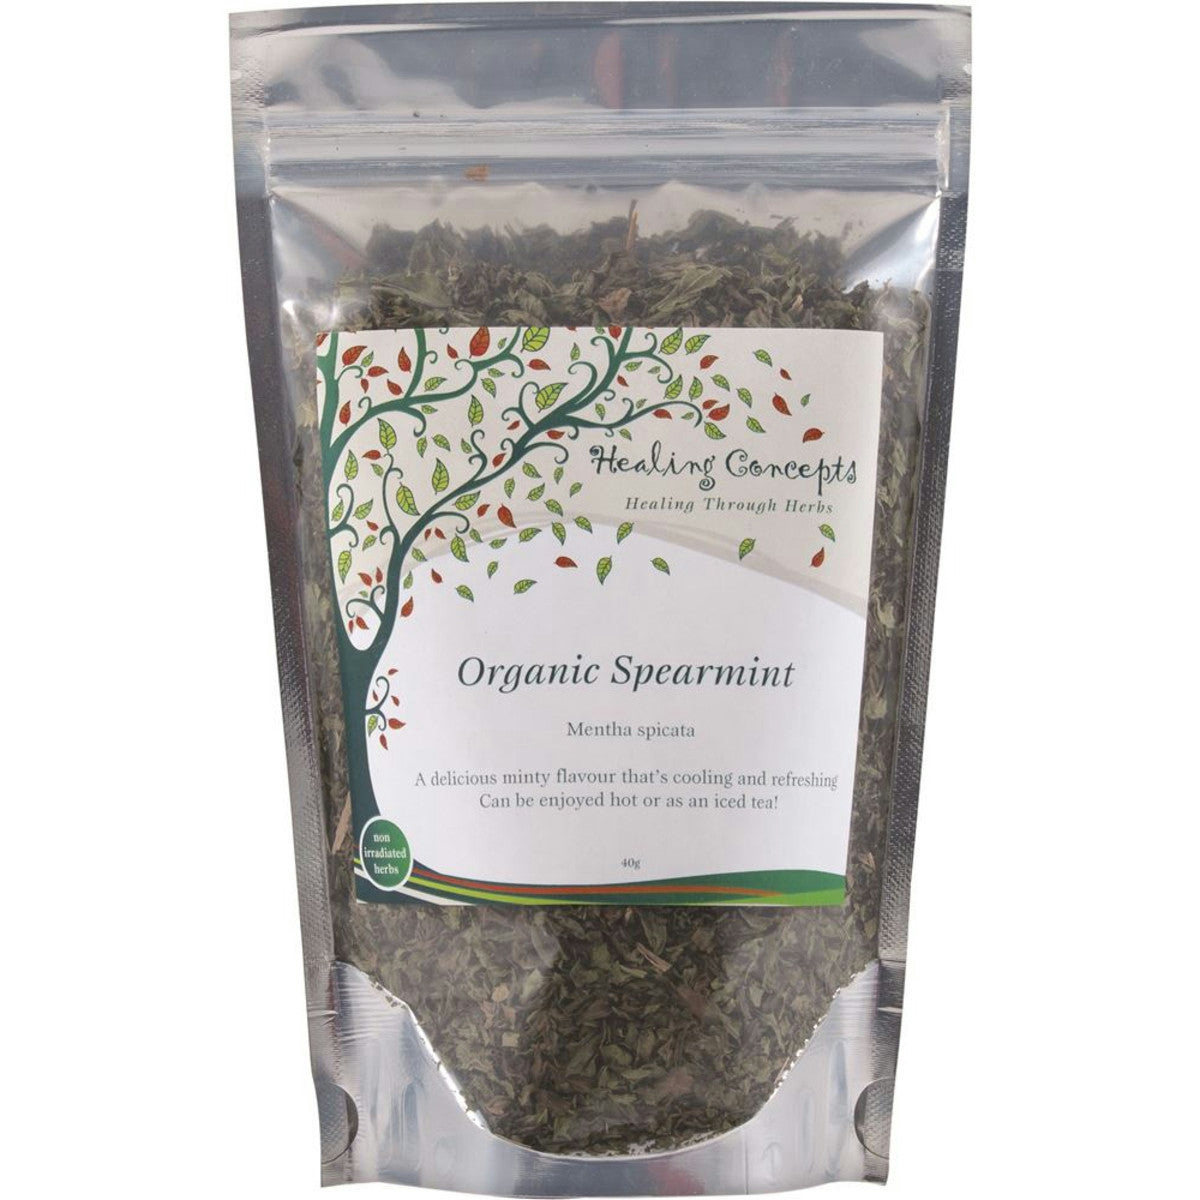 image of Healing Concepts Organic Spearmint Tea 40g on white background 